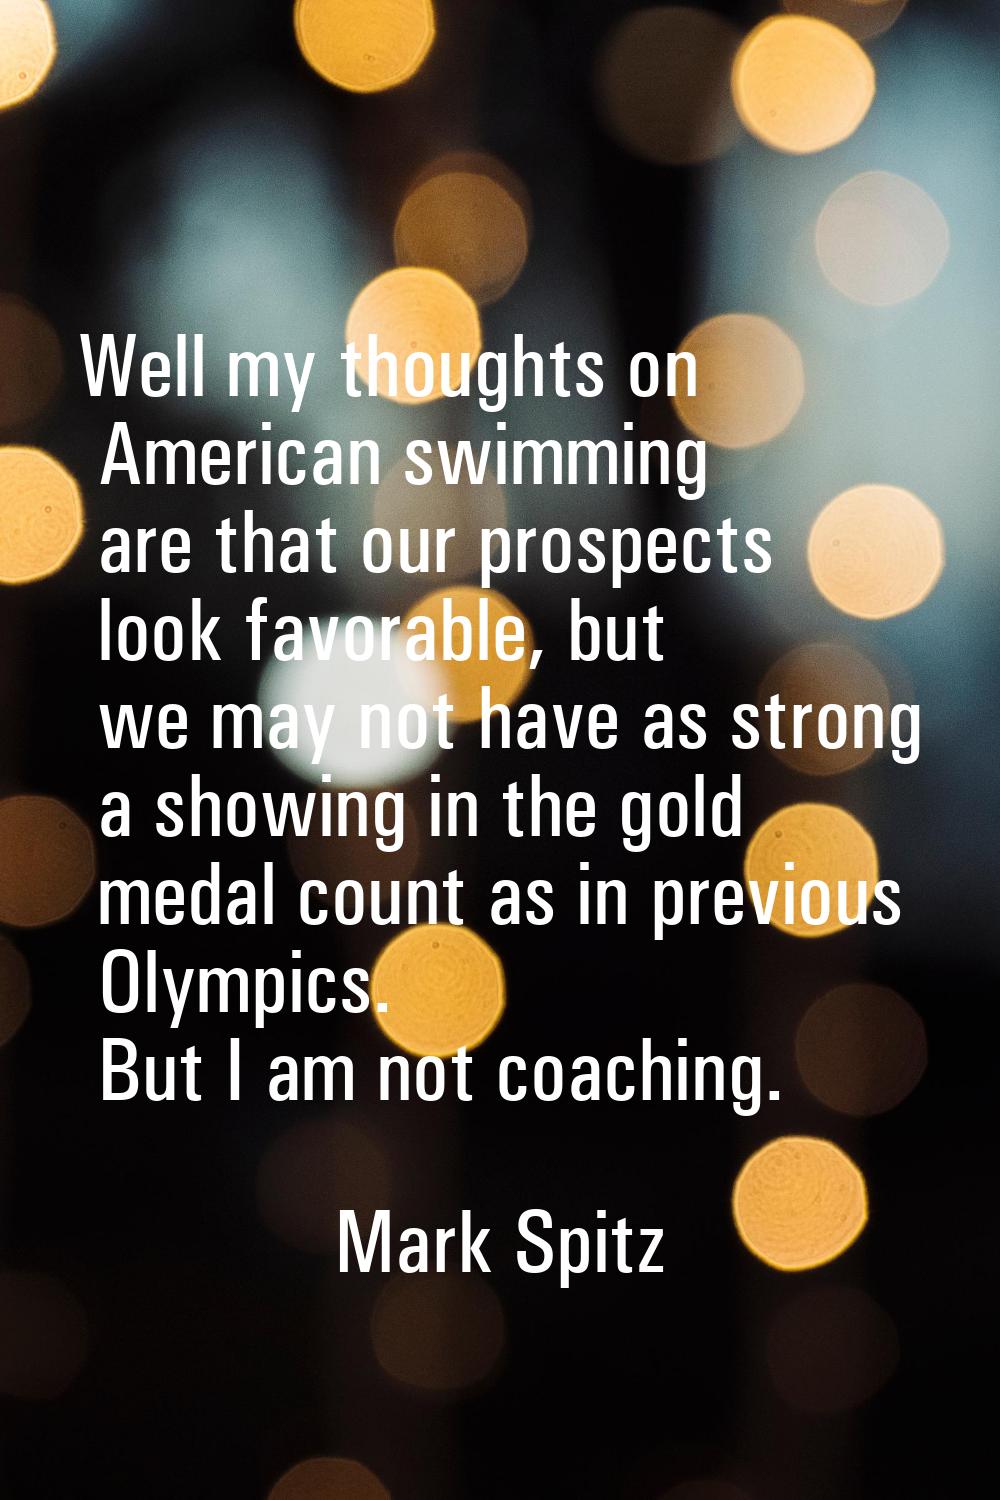 Well my thoughts on American swimming are that our prospects look favorable, but we may not have as